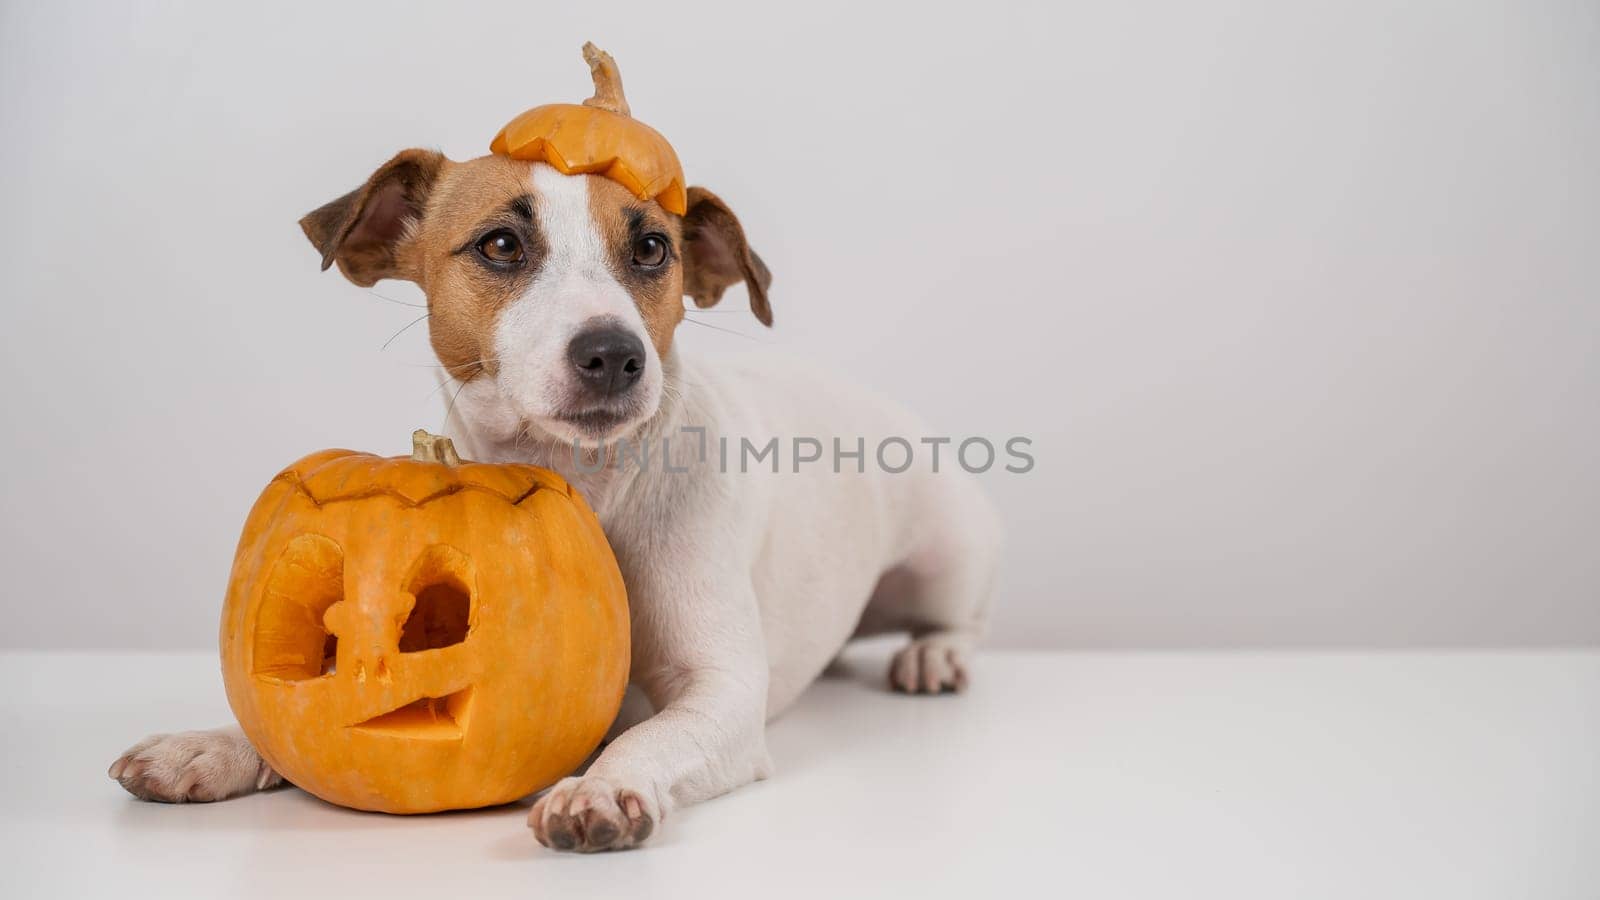 Jack Russell Terrier dog with a pumpkin cap and a jack-o-lantern on a white background